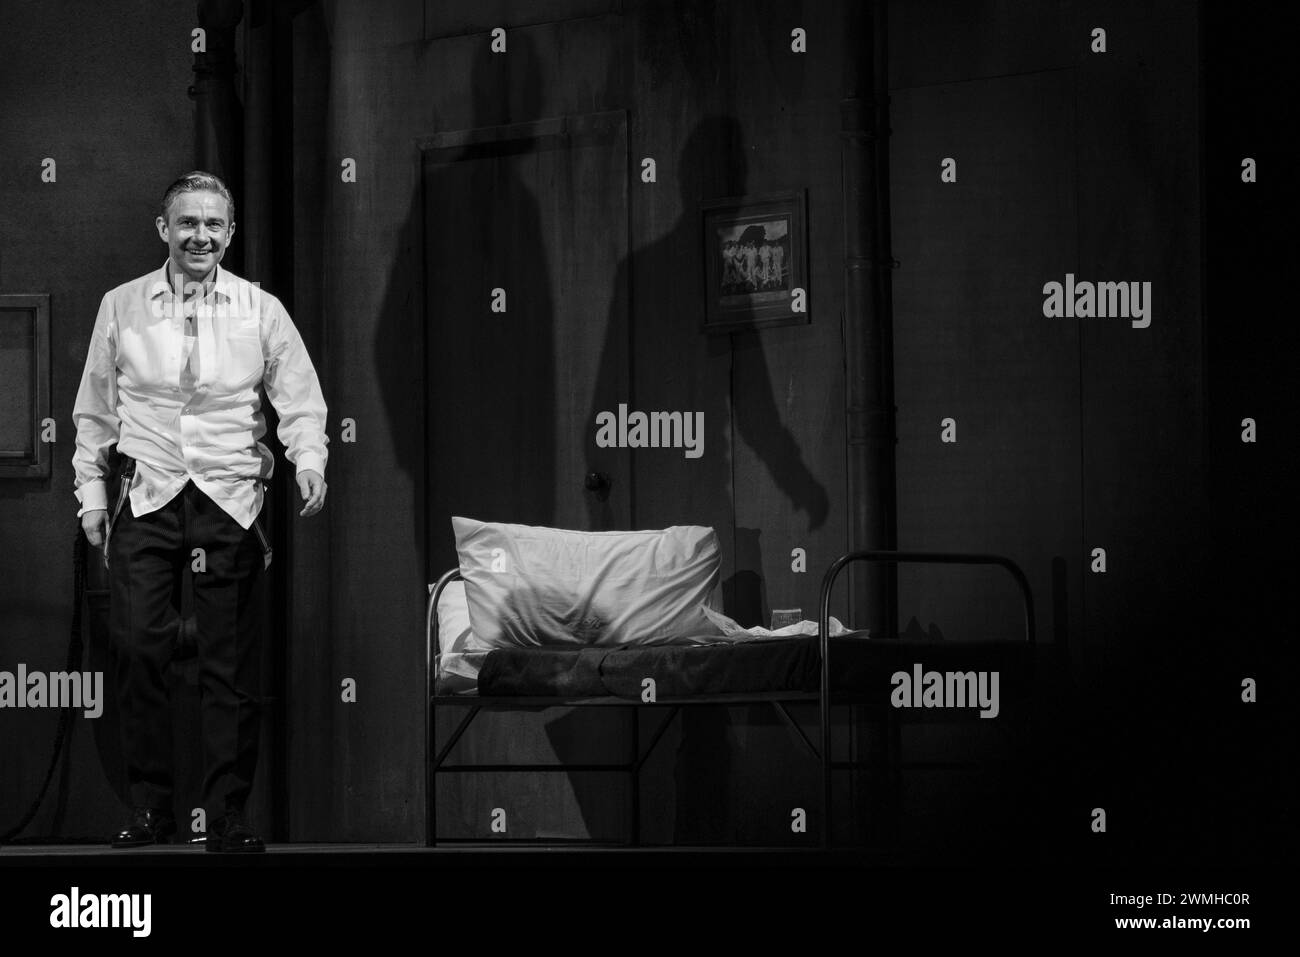 ACTOR MARTIN FREEMAN, PINTER PLAY, LONDON, 2019: Martin Freeman in the early Harold Pinter play The Dumb Waiter (1958) takes a curtain call at the Pinter Theatre in London on 6 February 2019. Photo: Rob Watkins.  INFO: 'The Dumb Waiter' by Harold Pinter is a one-act play that delves into themes of existentialism and absurdity. Set in a basement, it follows two hitmen awaiting their next assignment, navigating cryptic messages from an unseen employer, leading to tension and existential questioning. Stock Photo